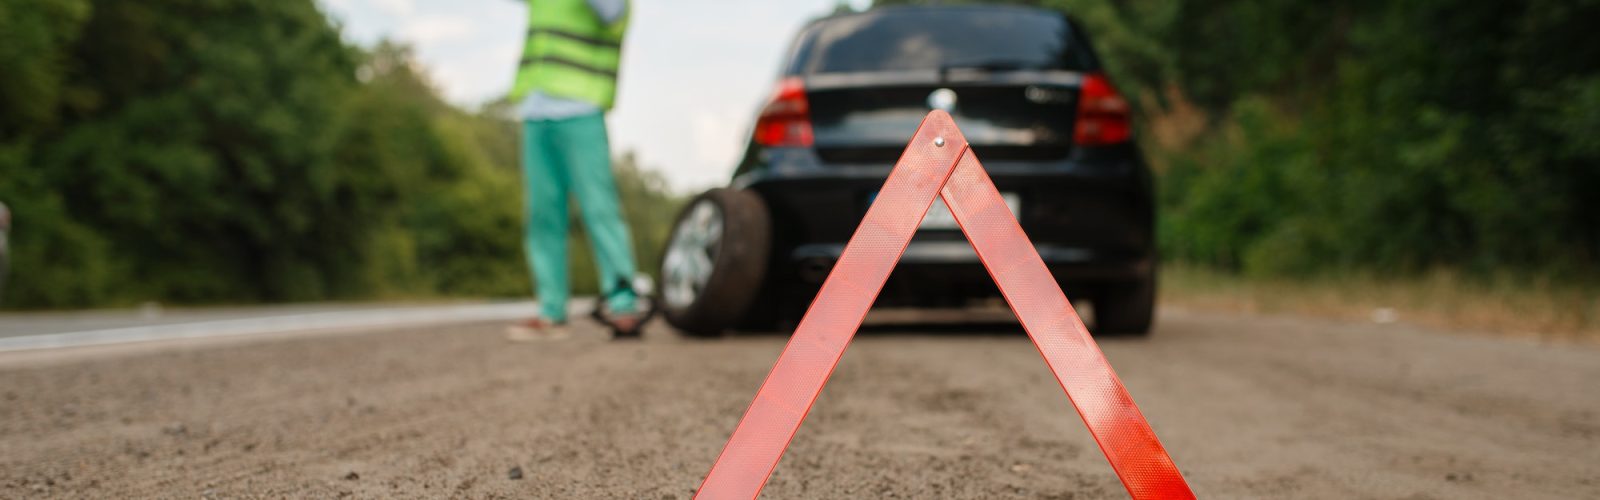 Affordable Towing Solutions in Minneapolis: Your Guide to Cheap Towing Services Emergency stop sign, car breakdown, flat tyre